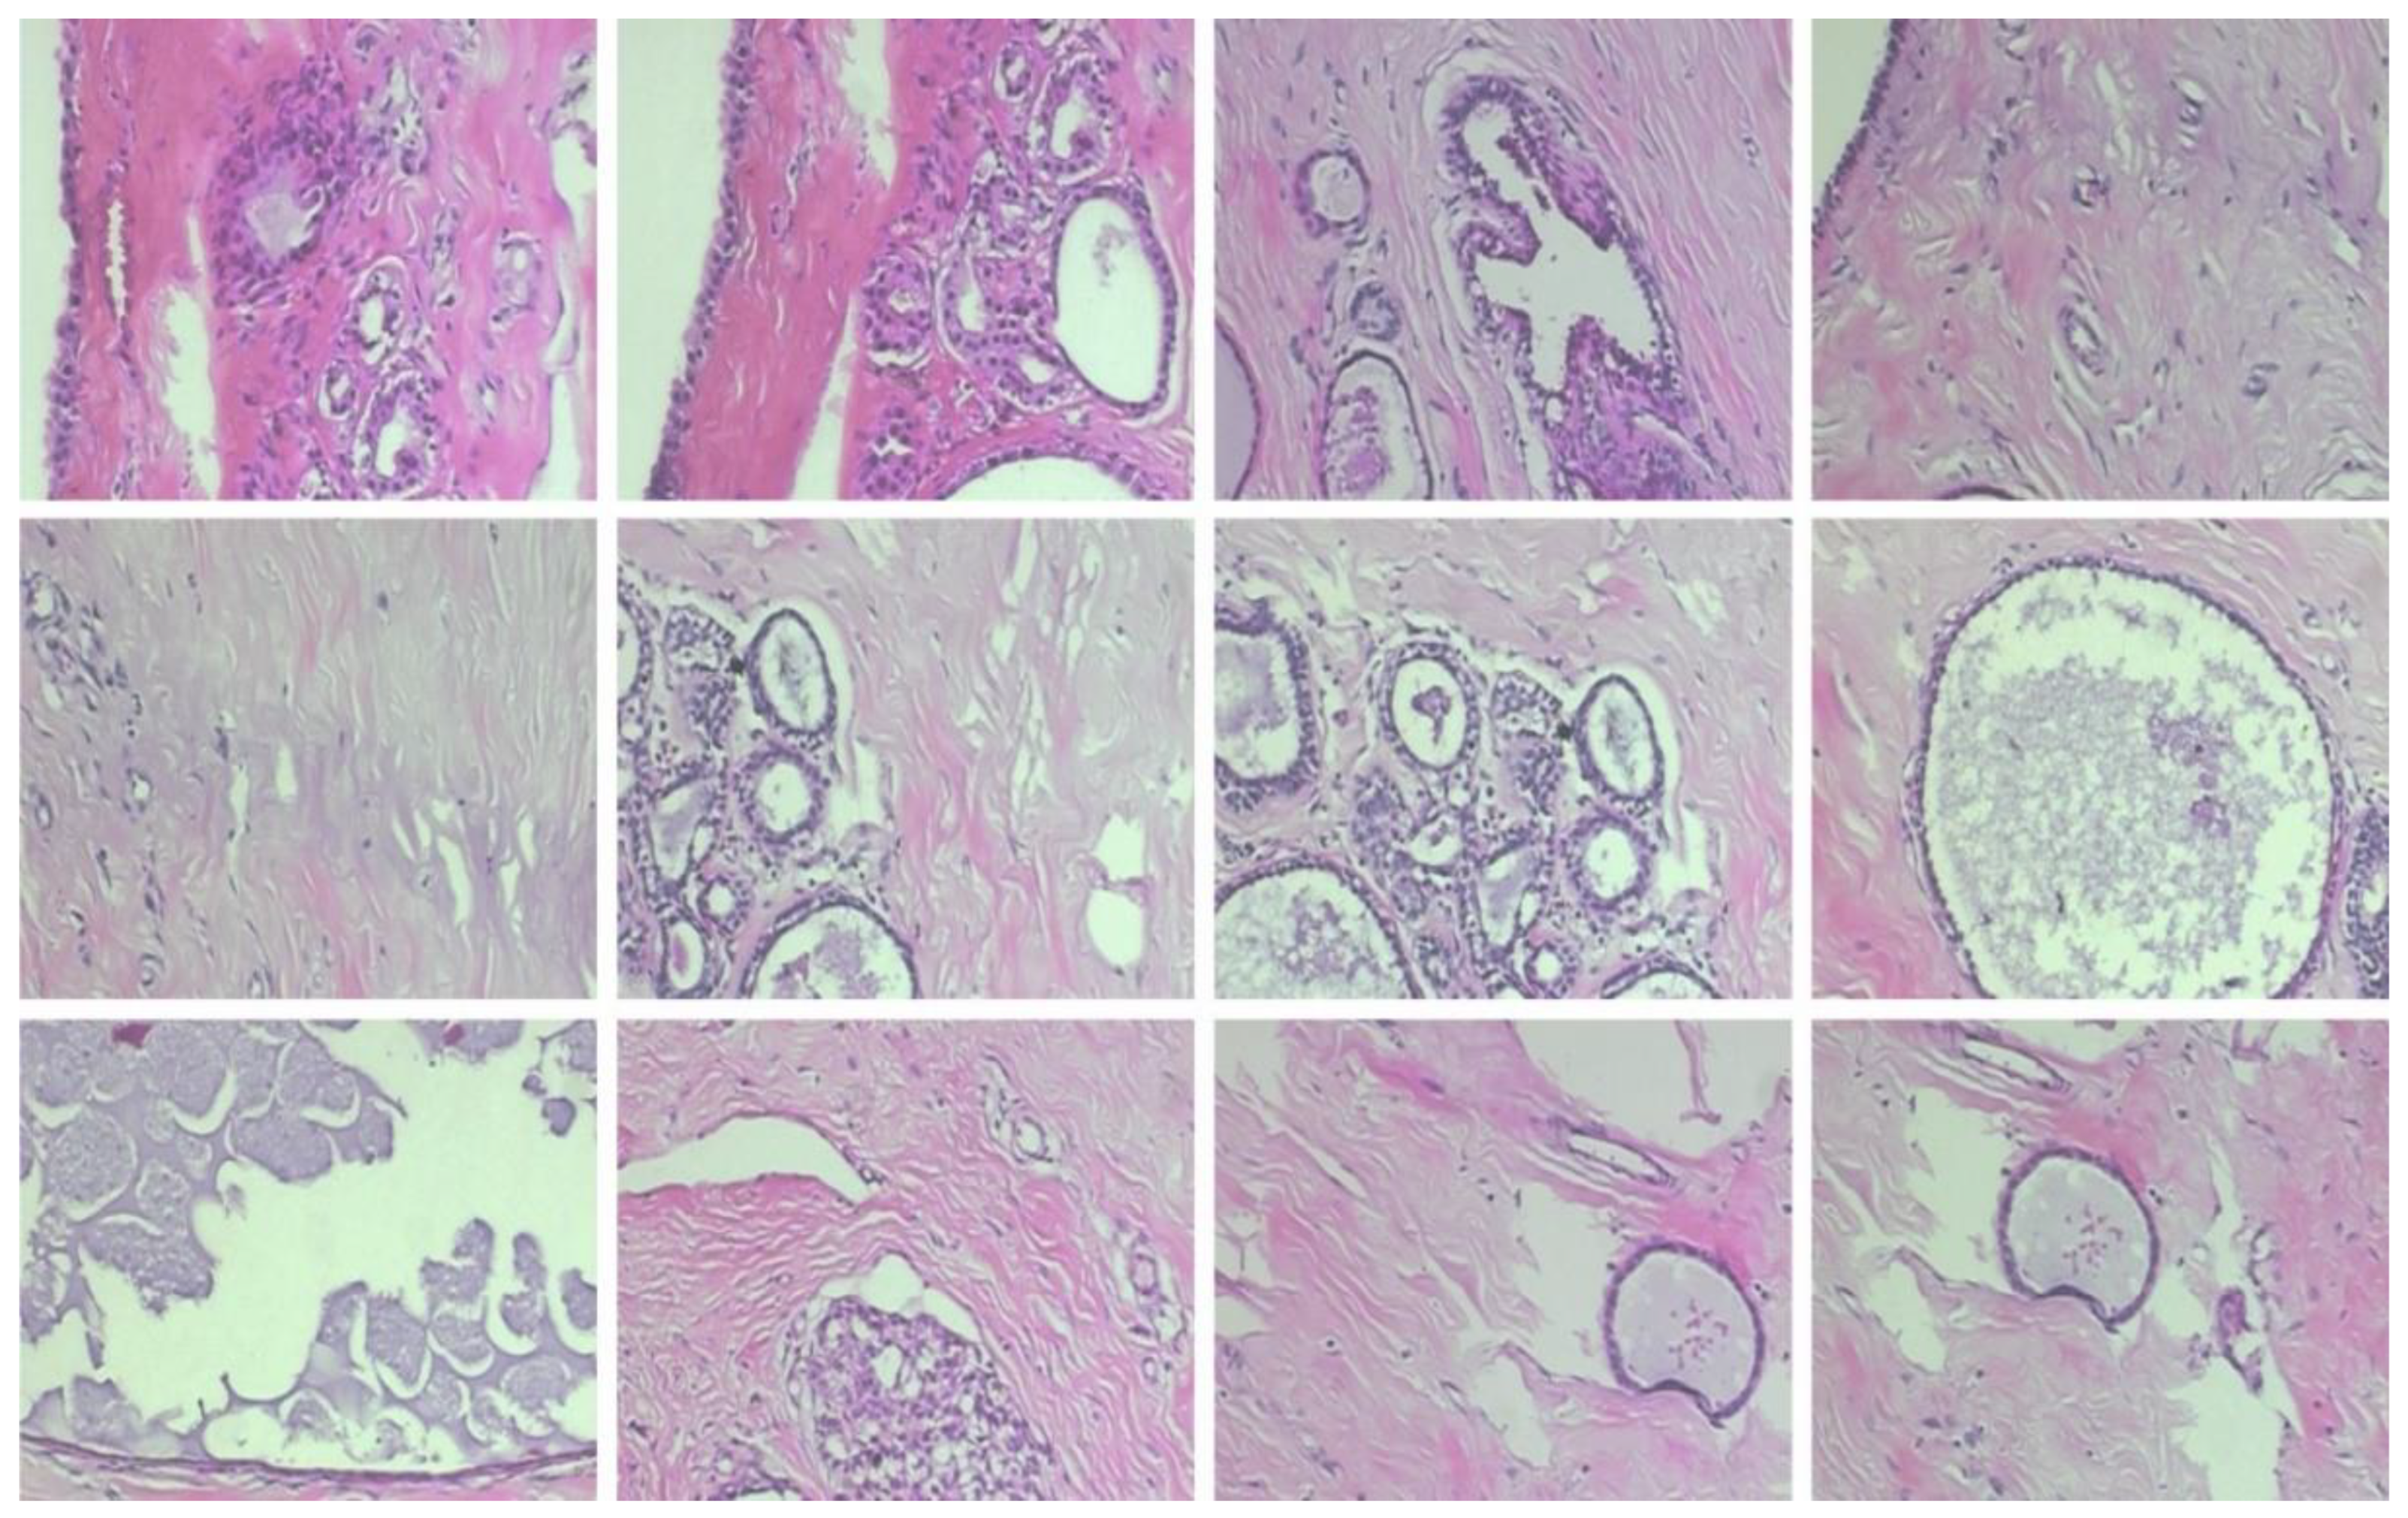 Classification of breast cancer using a manta-ray foraging optimized  transfer learning framework [PeerJ]